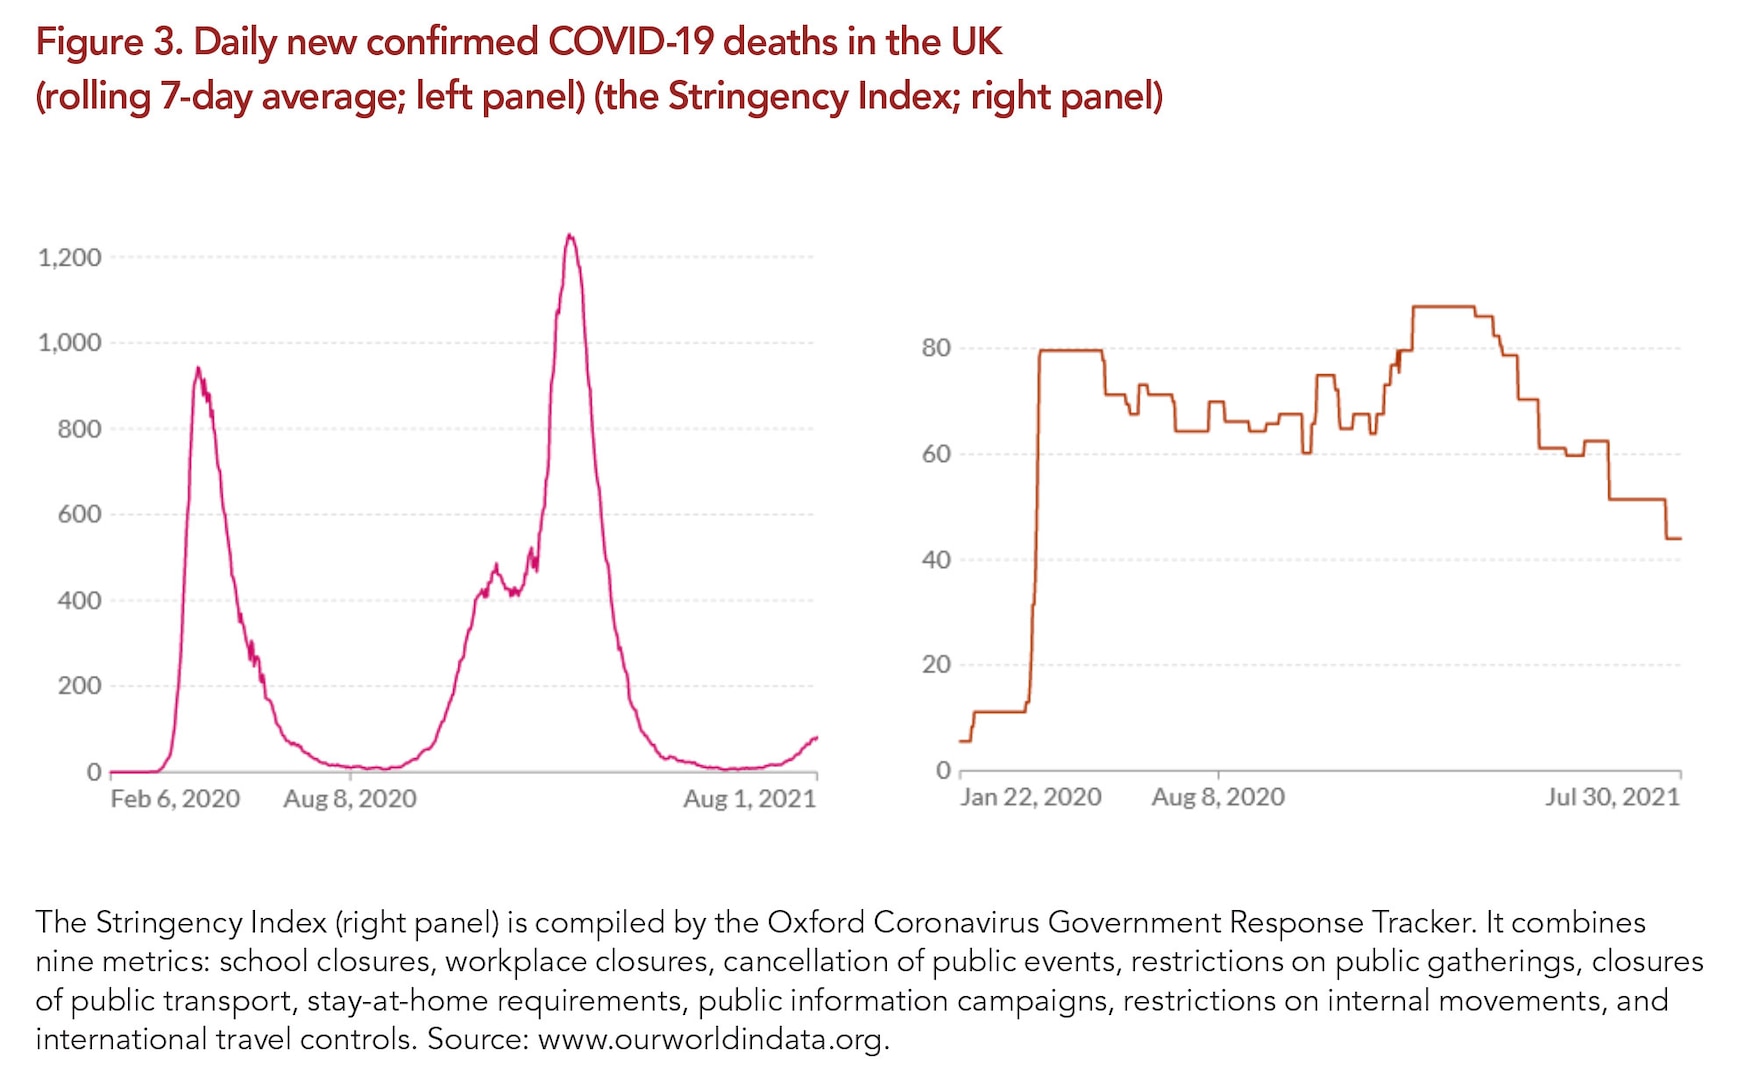 Figure 3. Daily new confirmed COVID-19 deaths in the UK (rolling 7-day average; left panel) (the Stringency Index; right panel)